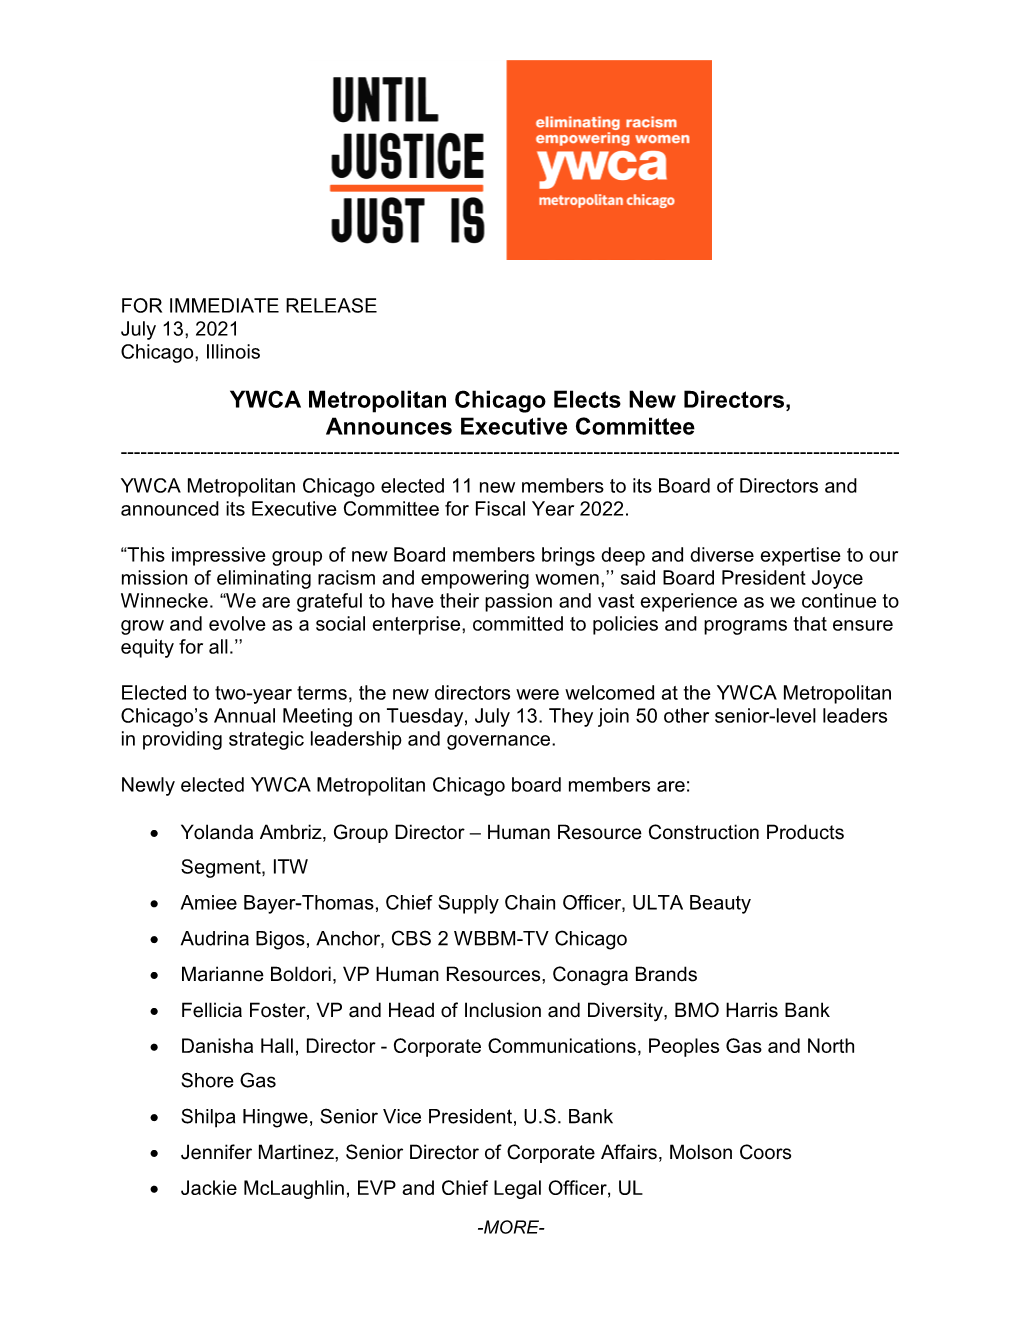 YWCA Metropolitan Chicago Elects New Directors, Announces Executive Committee